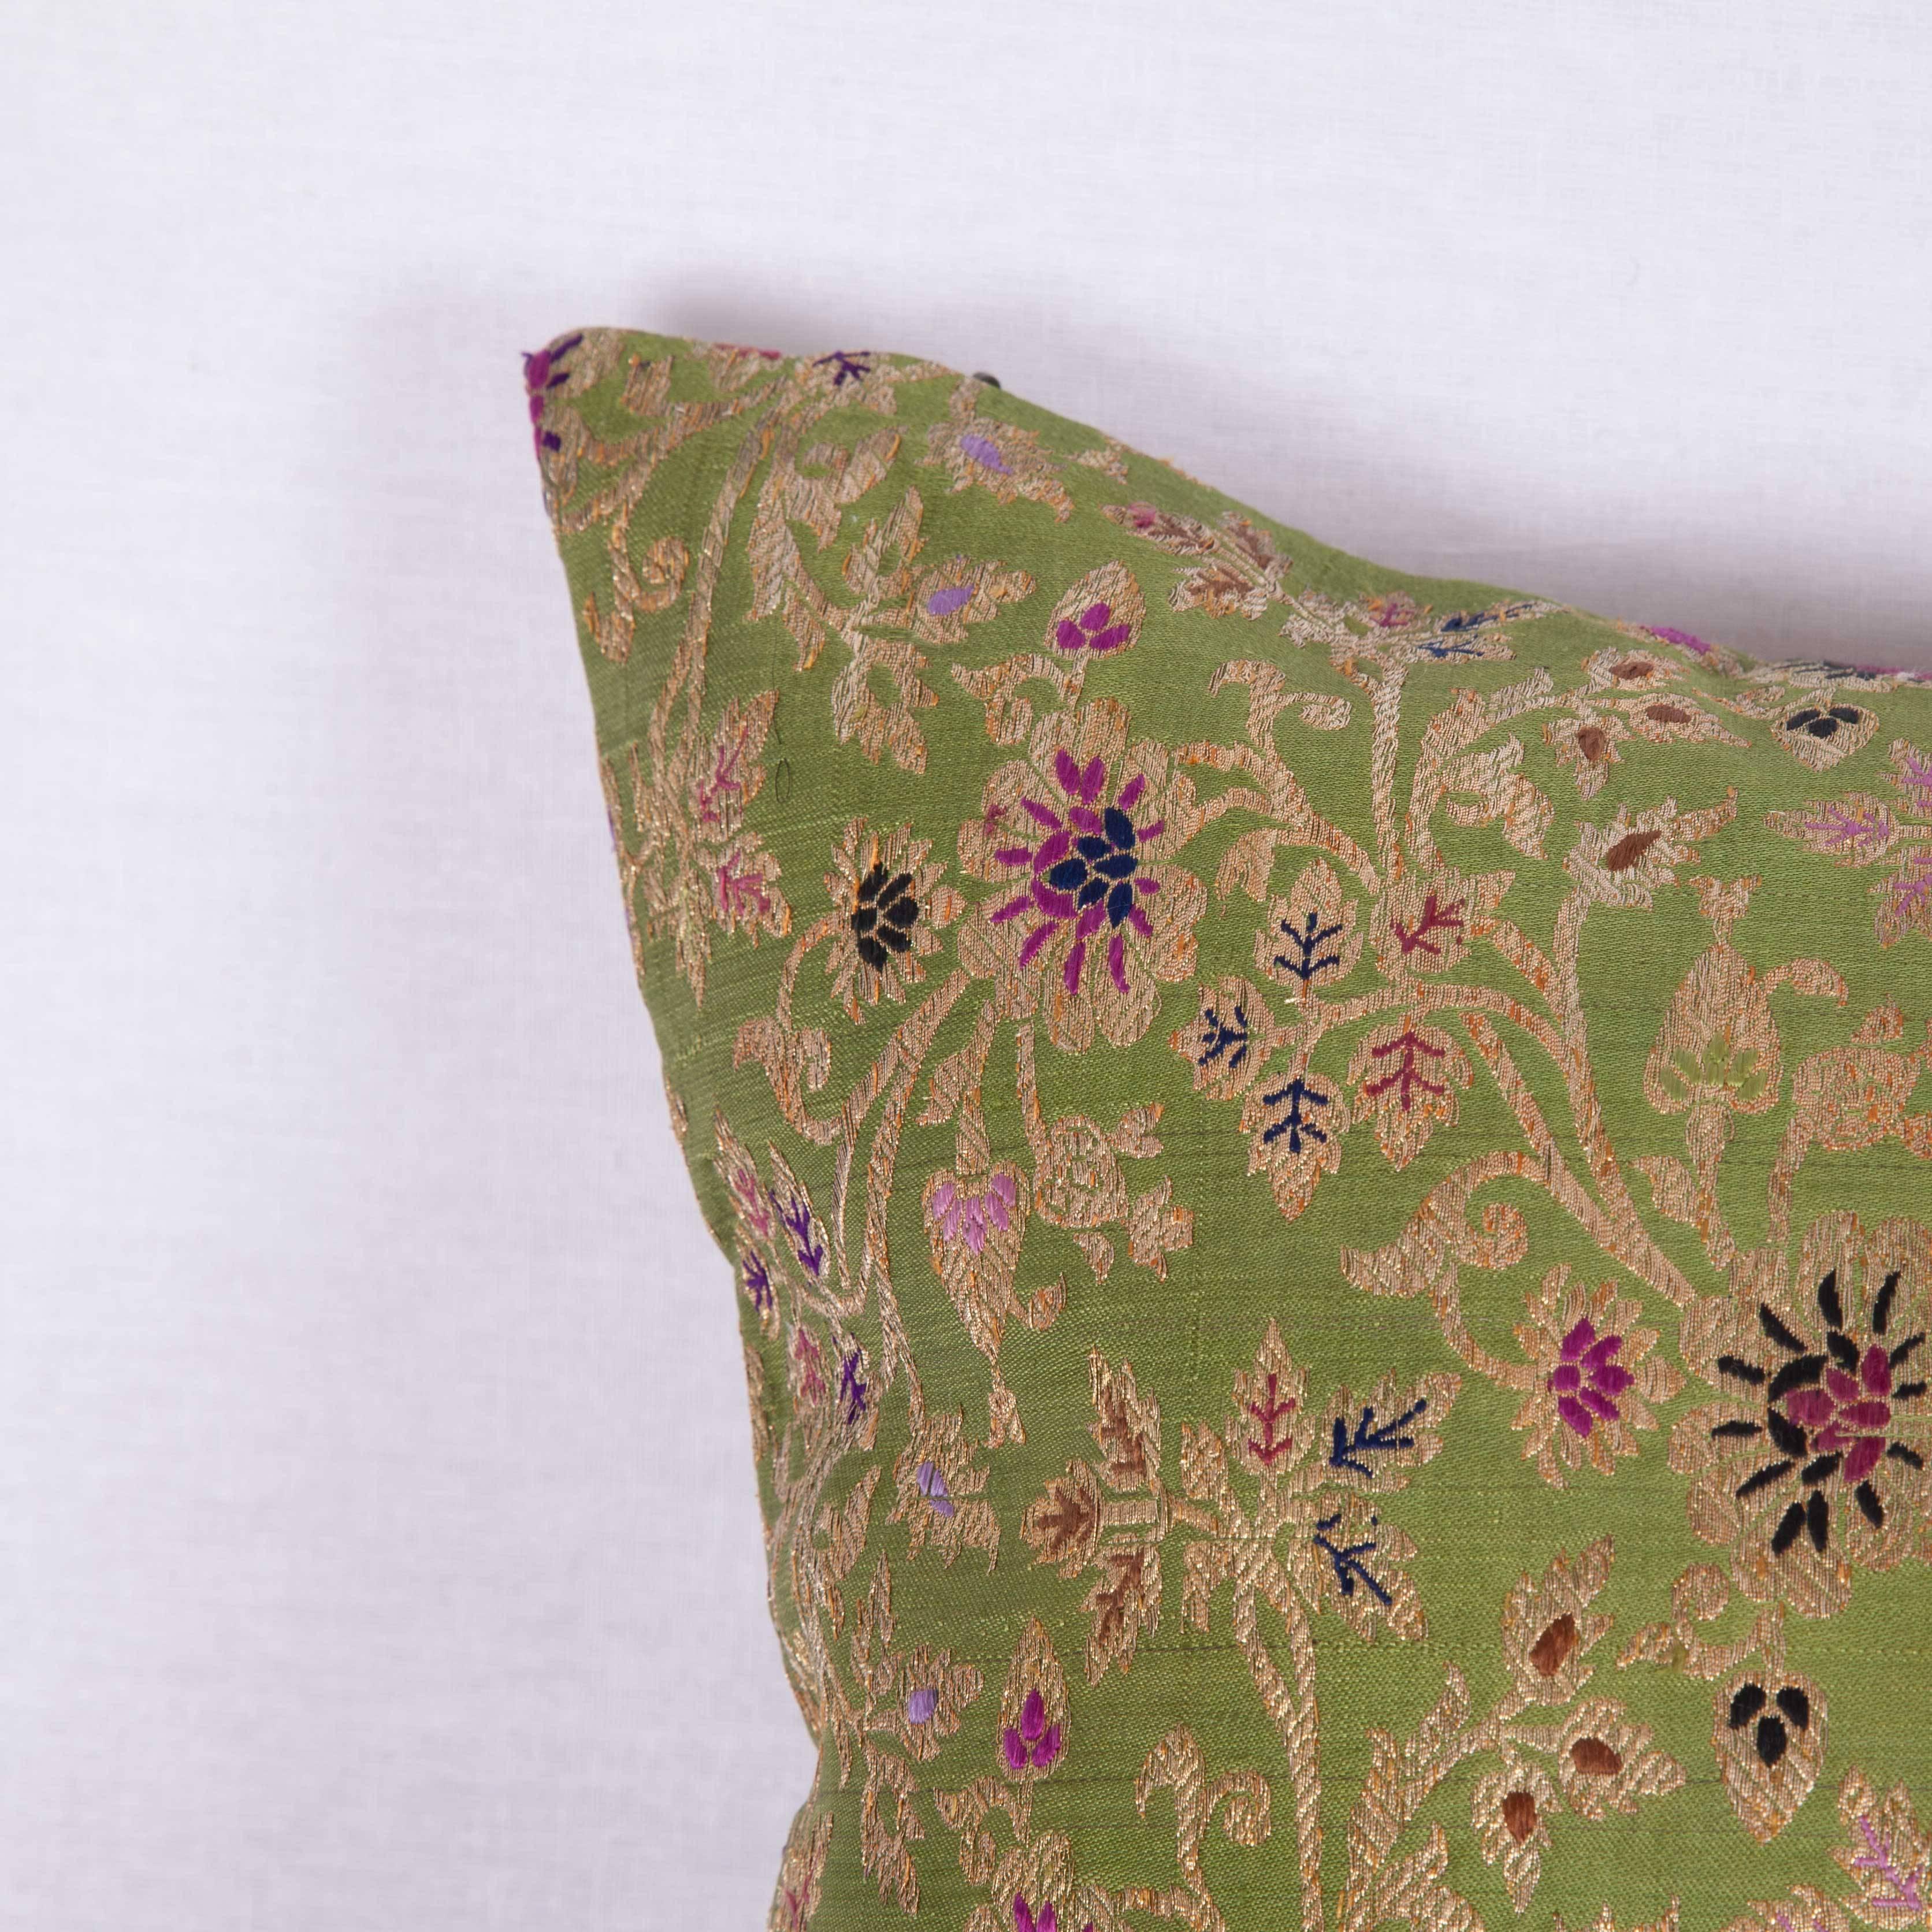 The pillow is made out of mid-19th century, Persian brocade. It does not come with an insert but it comes with a bag made to the size and out of cotton to accommodate the filling. The backing is made of linen. Please note ' filling is not provided'.